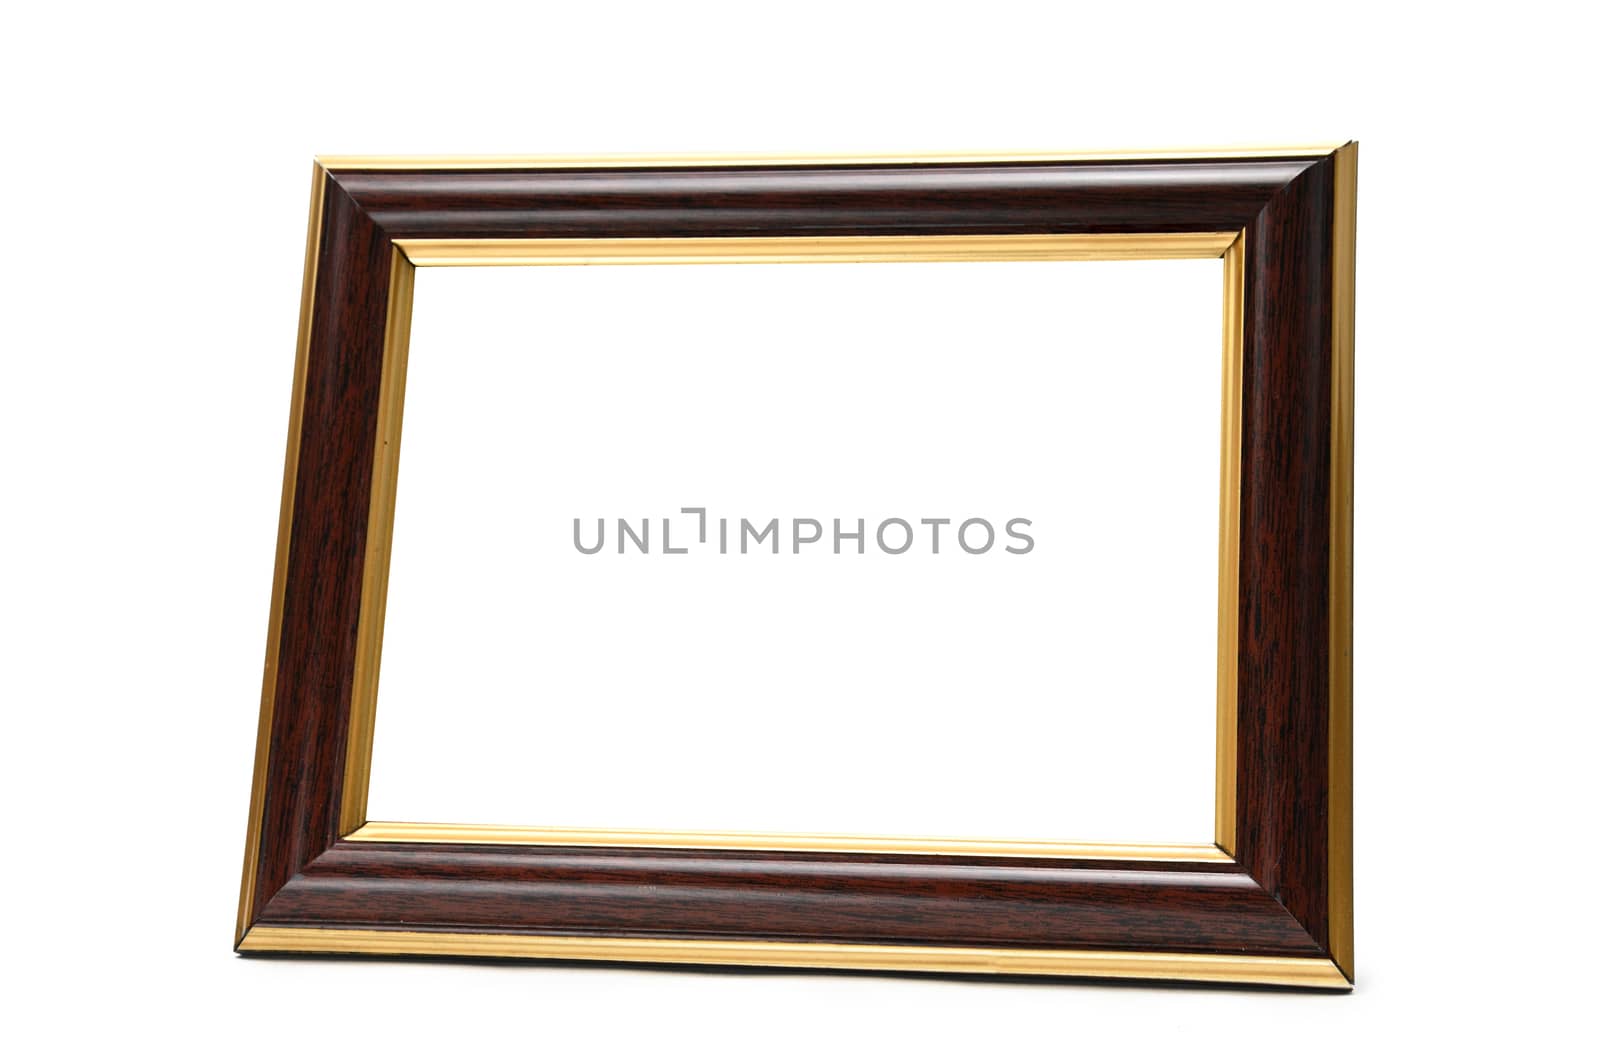 Vintage wooden photo frame on an isolated white background.
